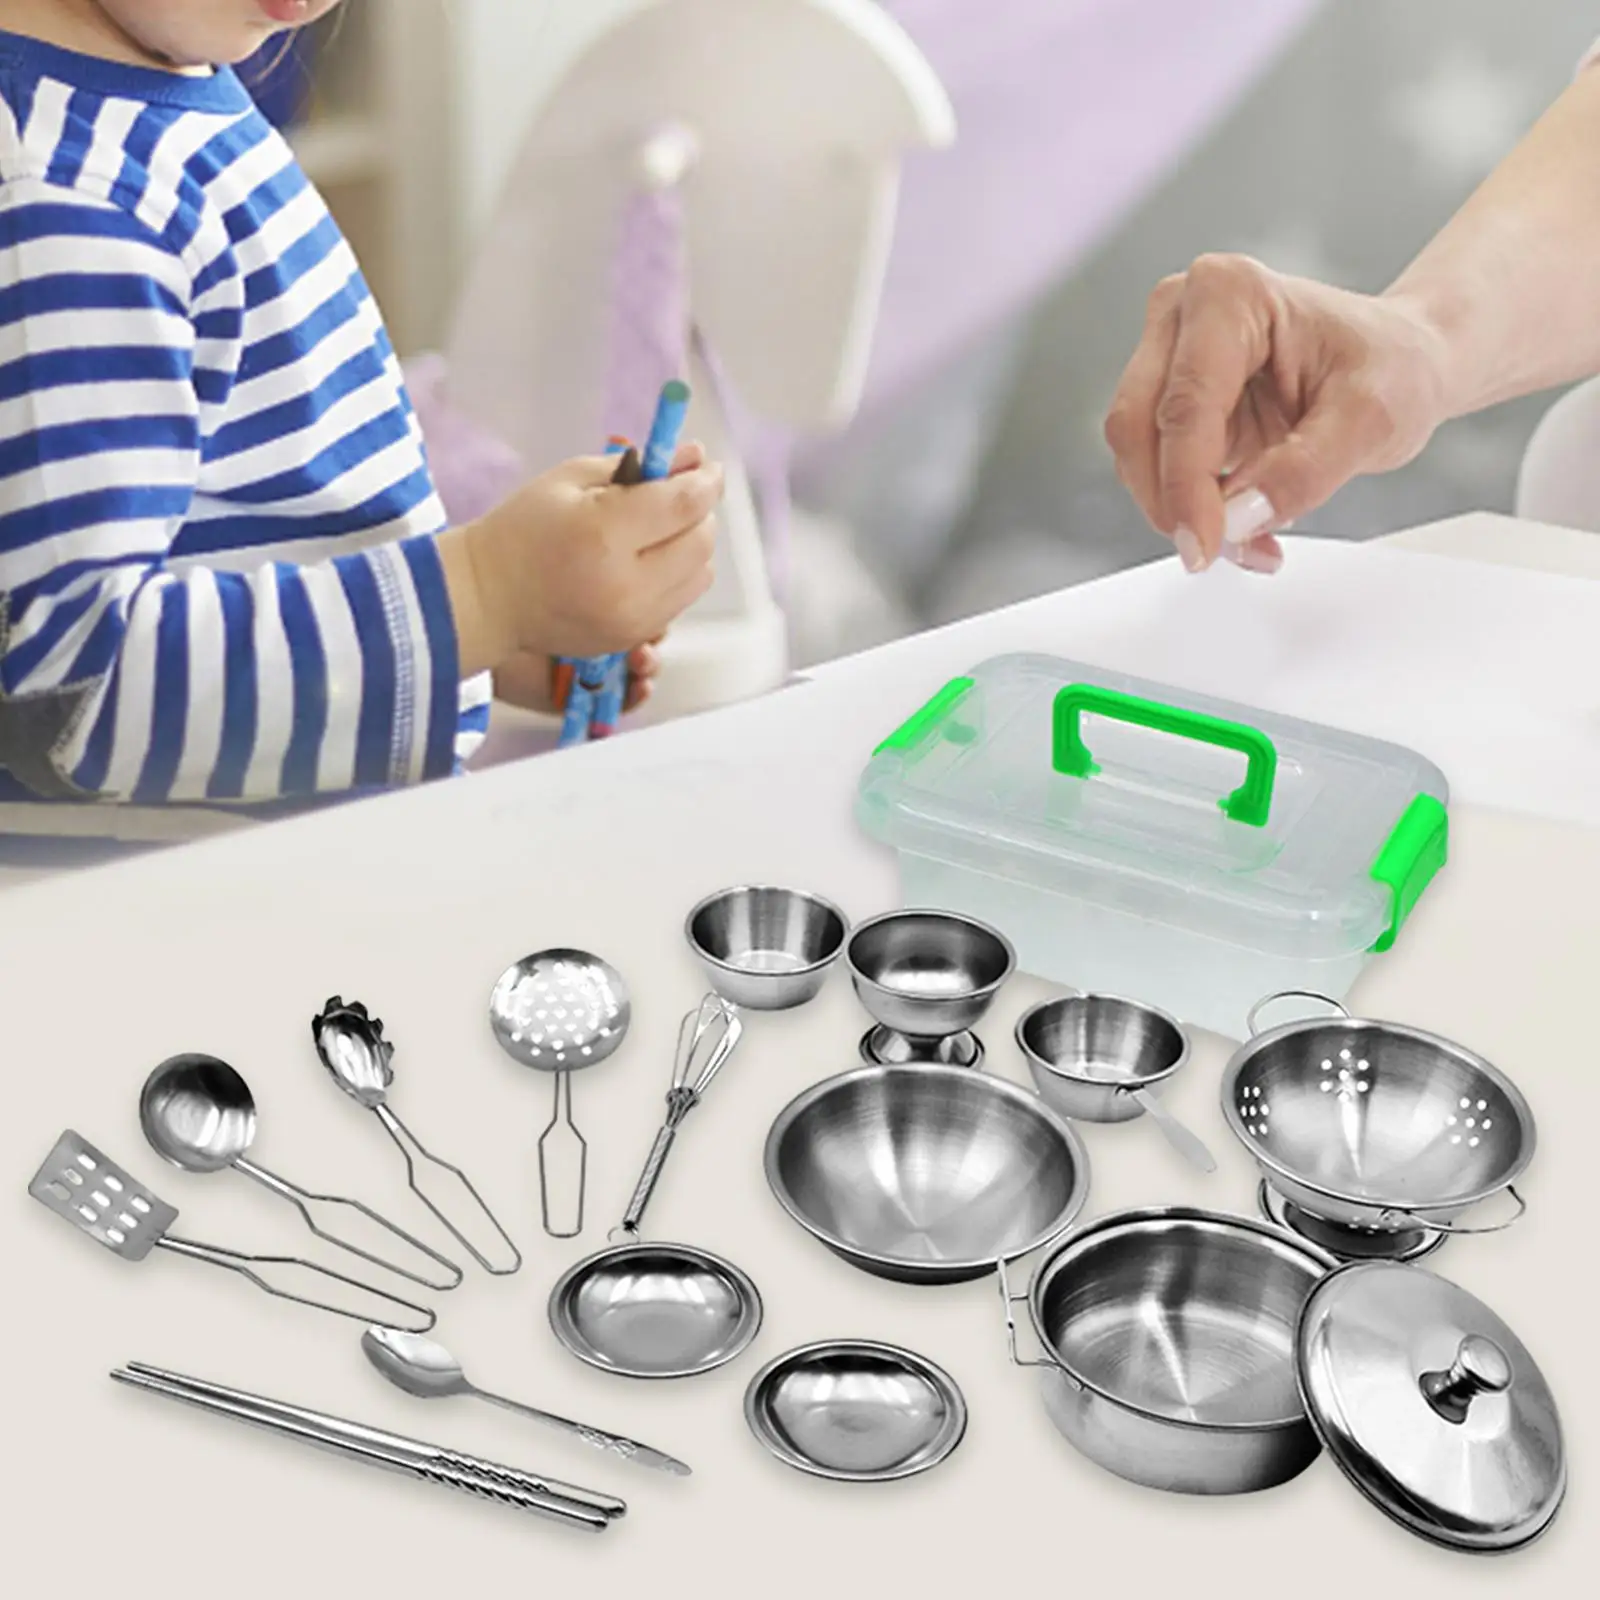 

17 Pieces Kids Kitchen Cookware Toy Kids Play Pots and Utensils Playset for Preschool Boys Girls Birthday Gift Kids Party Toy